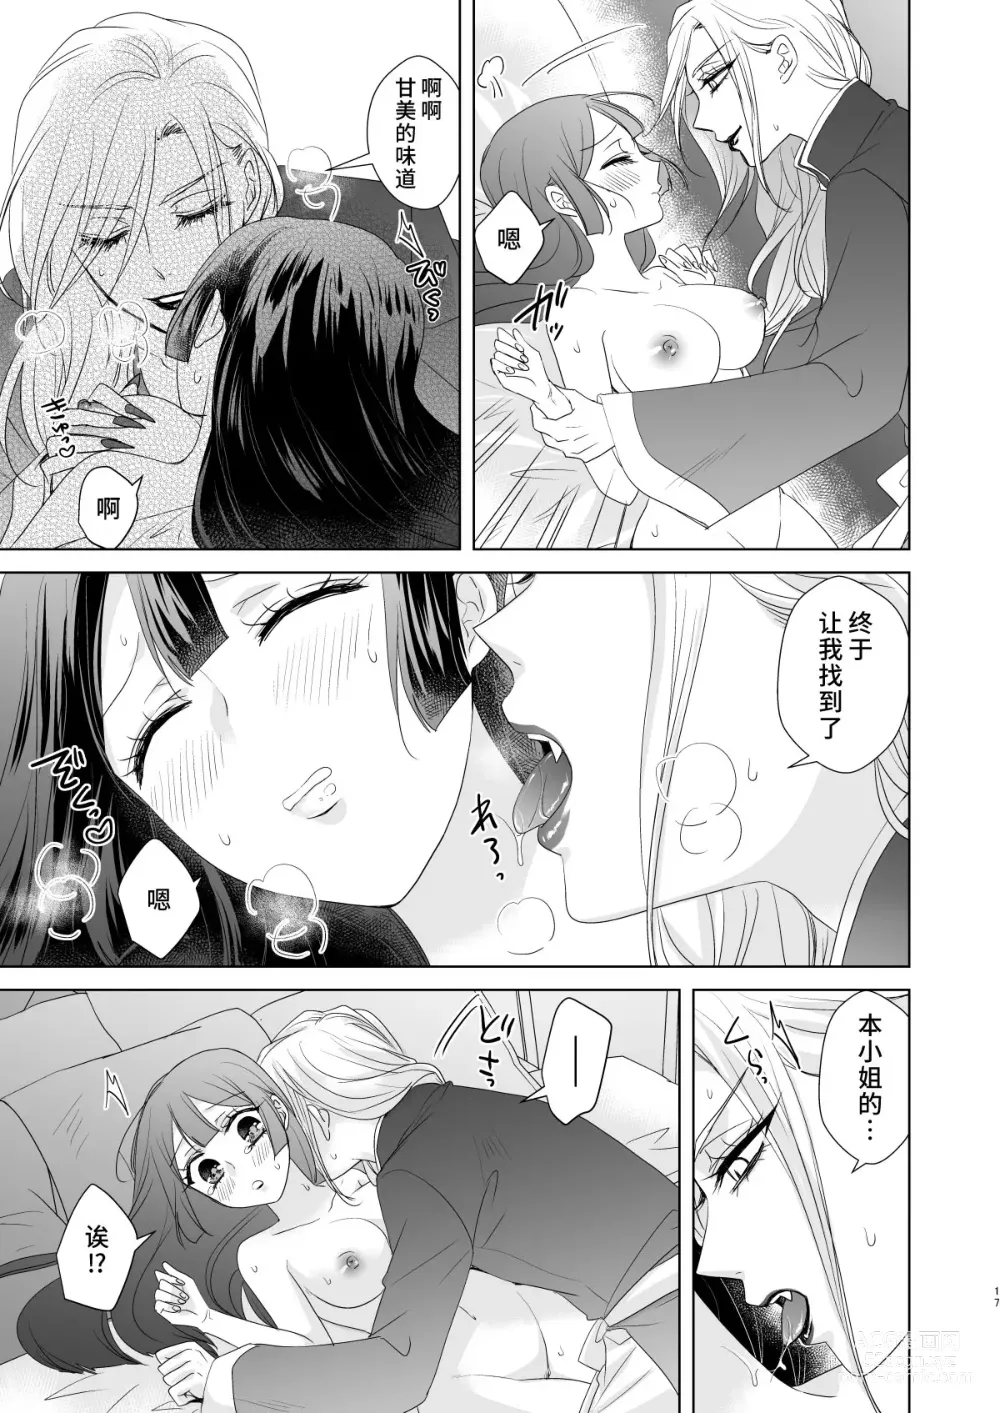 Page 16 of doujinshi 男大姐♂吸血鬼和少女